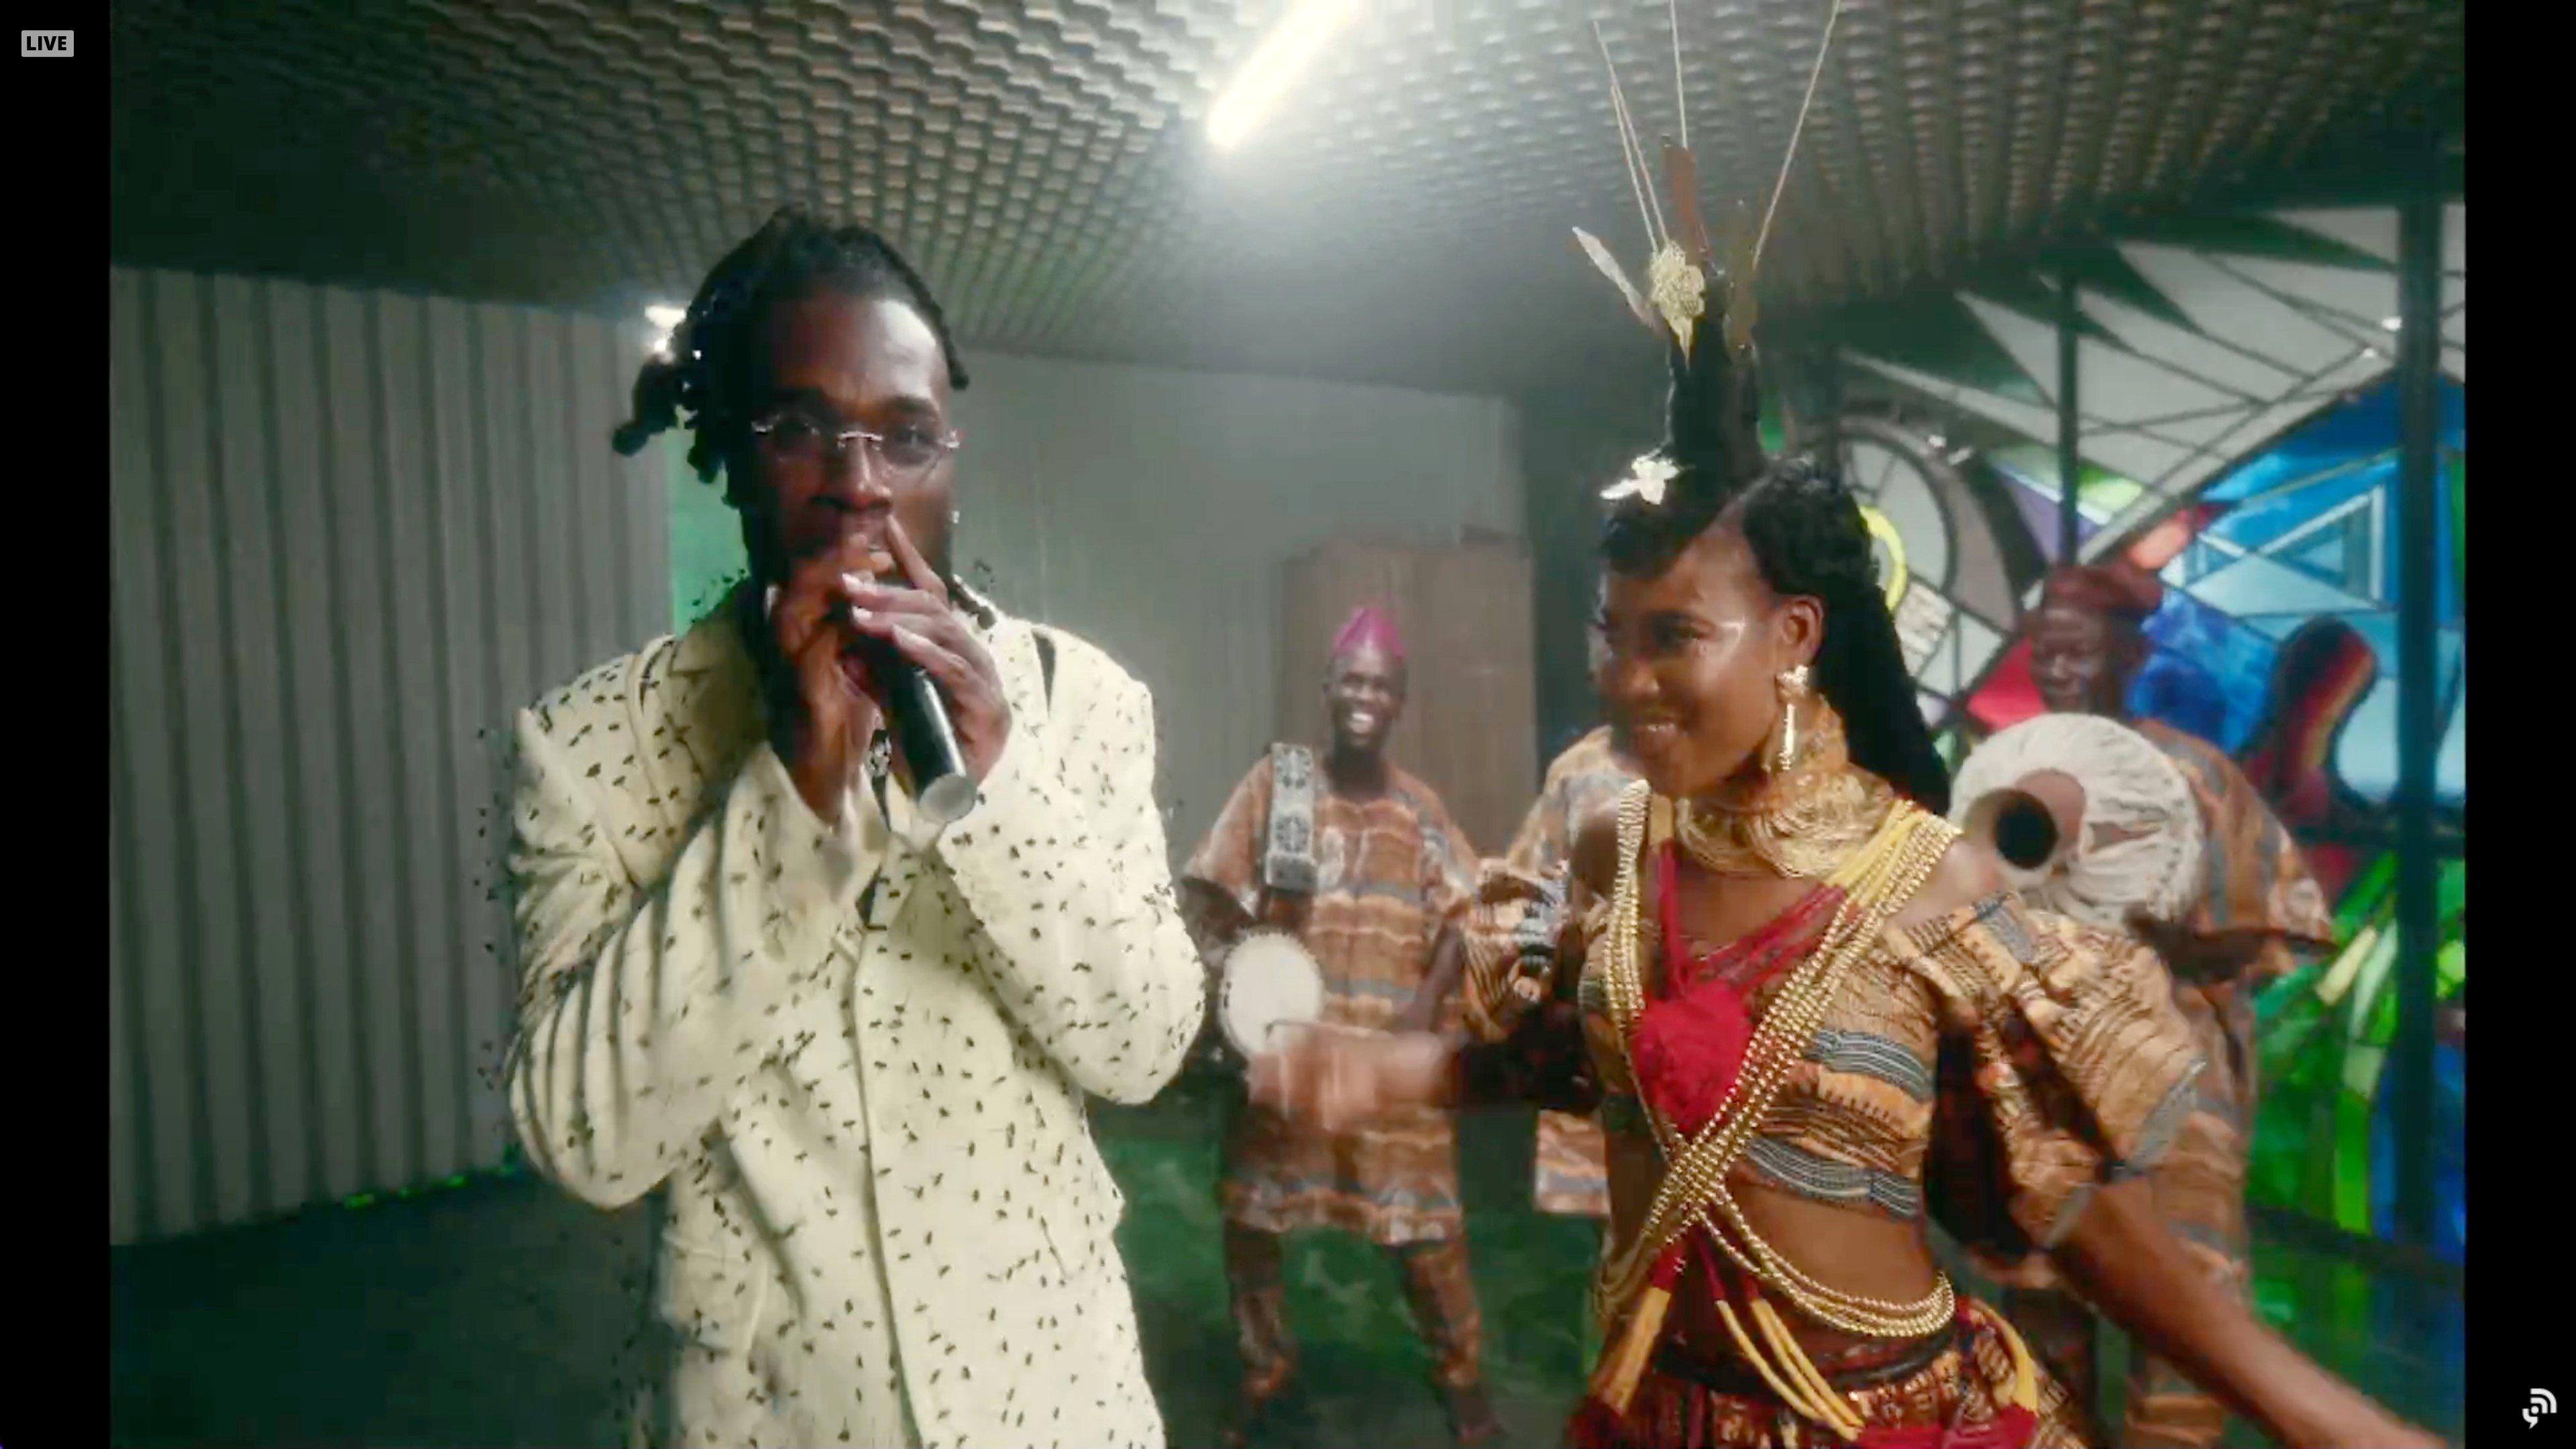 Burna Boy performs at 2021 GRAMMY Awards Premiere Ceremony with dancers